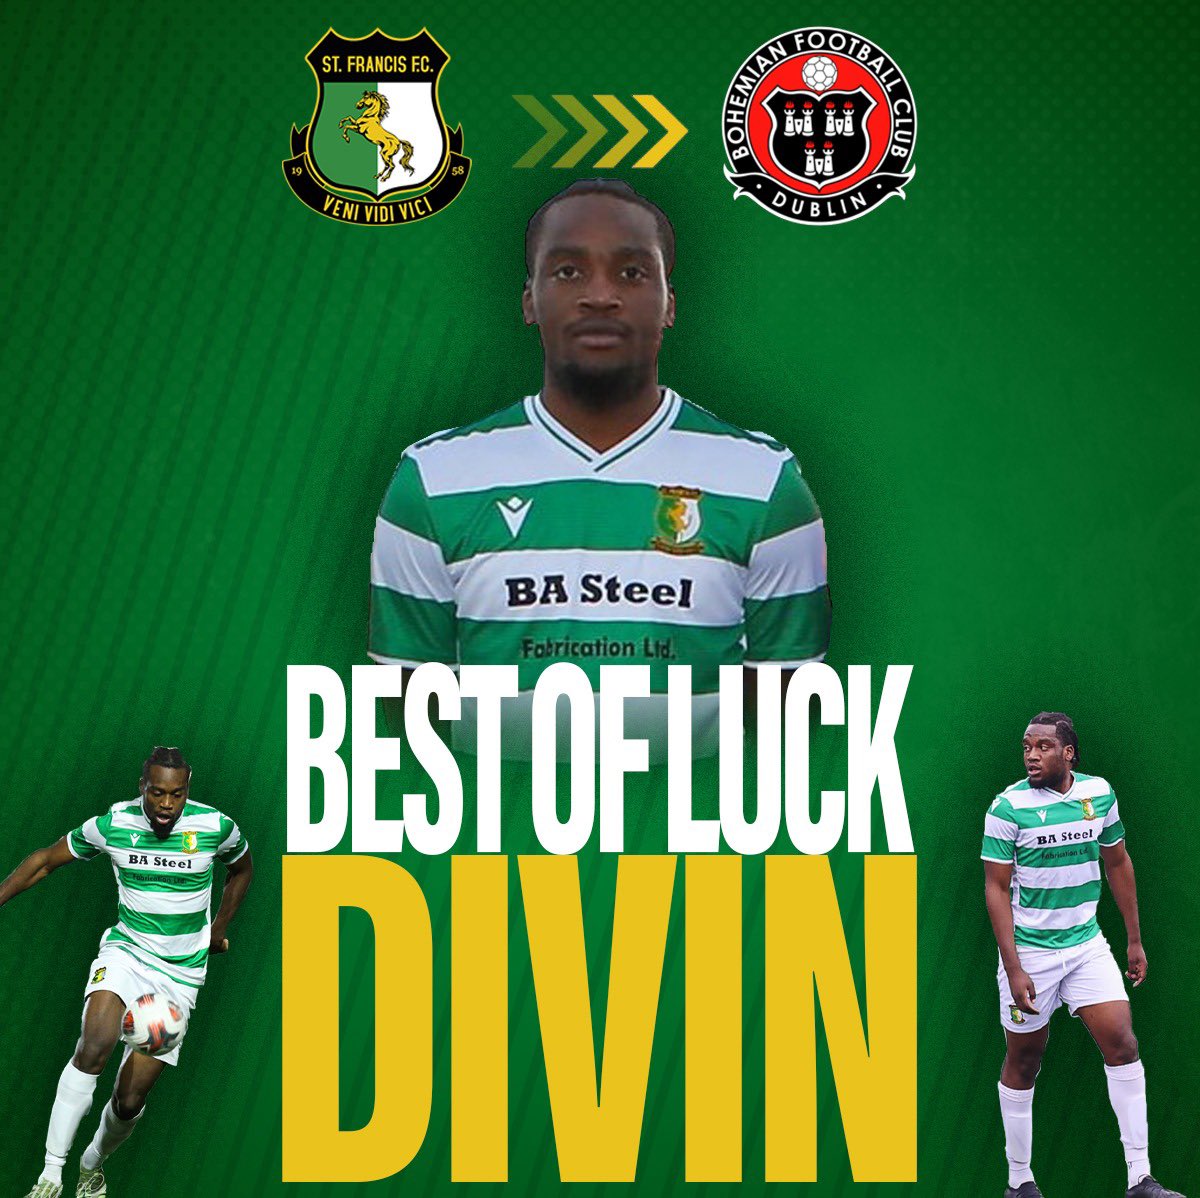 ‼️Breaking News ‼️ Everyone at @StFrancisFC would like to wish Senior Sunday player Divin Isamala all the best as he has today taken the step to LOI and signed for Bohs. We will all be watching and cheering him on in his development! @LSLLeague @bfcdublin 🇳🇬Veni Vidi Vici 🇳🇬